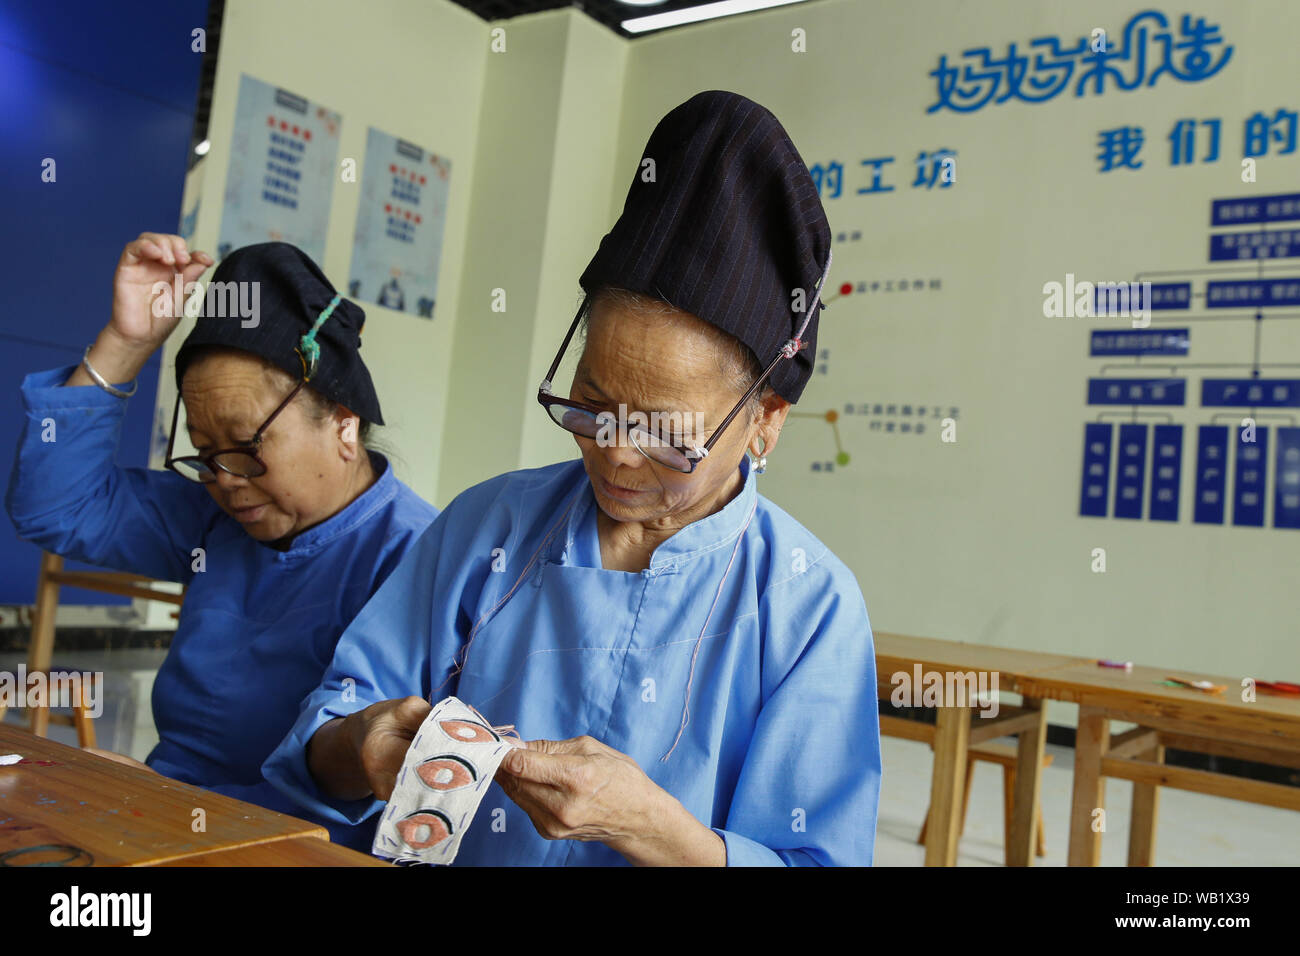 Danzhai, China. 23rd Aug, 2019. Craftswomen of Miao ethnic group make Miao embroidery at a Miao handicraft cooperative of 'Mom Handworks' in Taijiang County, southwest China's Guizhou Province, Aug. 22, 2019. A handicraft cooperative and a batik craft cooperative of 'Mom Handworks', a public welfare project initiated by China Women's Development Foundation (CWDF), were put into operation in Guizhou's Taijiang and Danzhai respectively. Credit: Xinhua/Alamy Live News Stock Photo